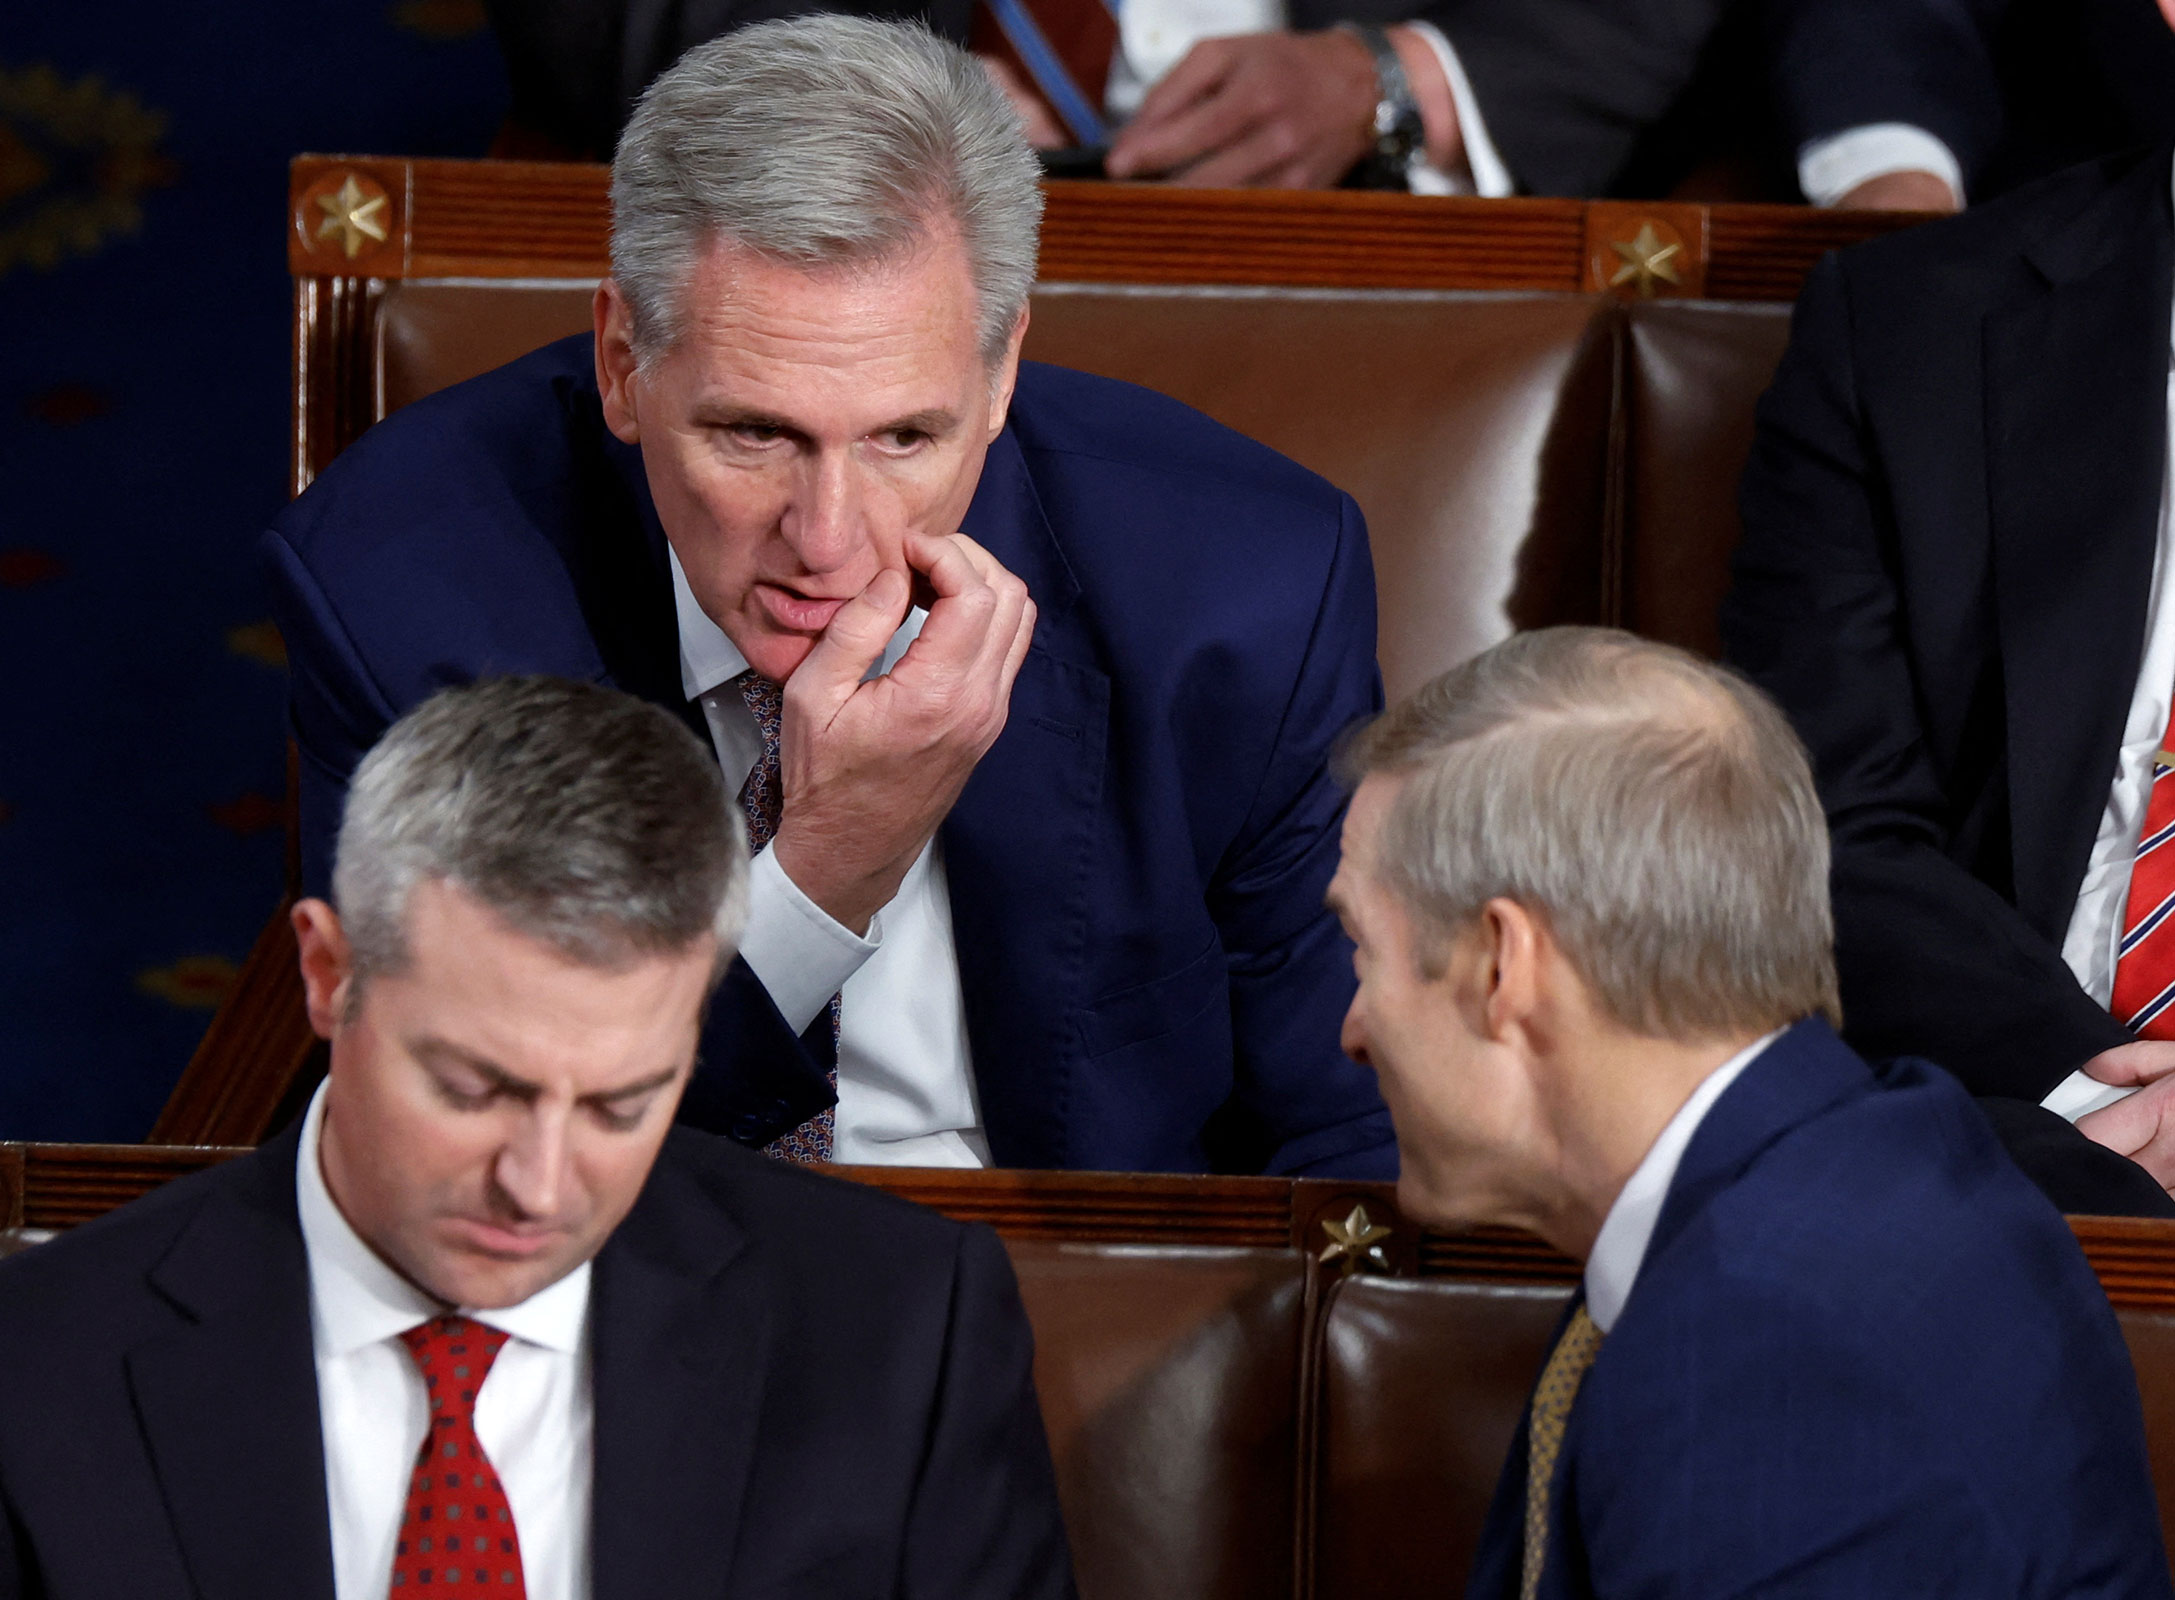 Former Speaker of the House Kevin McCarthy talks with U.S. Rep. Jim Jordan during the first round of voting for a new Speaker of the House on the floor of the House of Representatives at the U.S. Capitol in Washington, DC, on Tuesday.